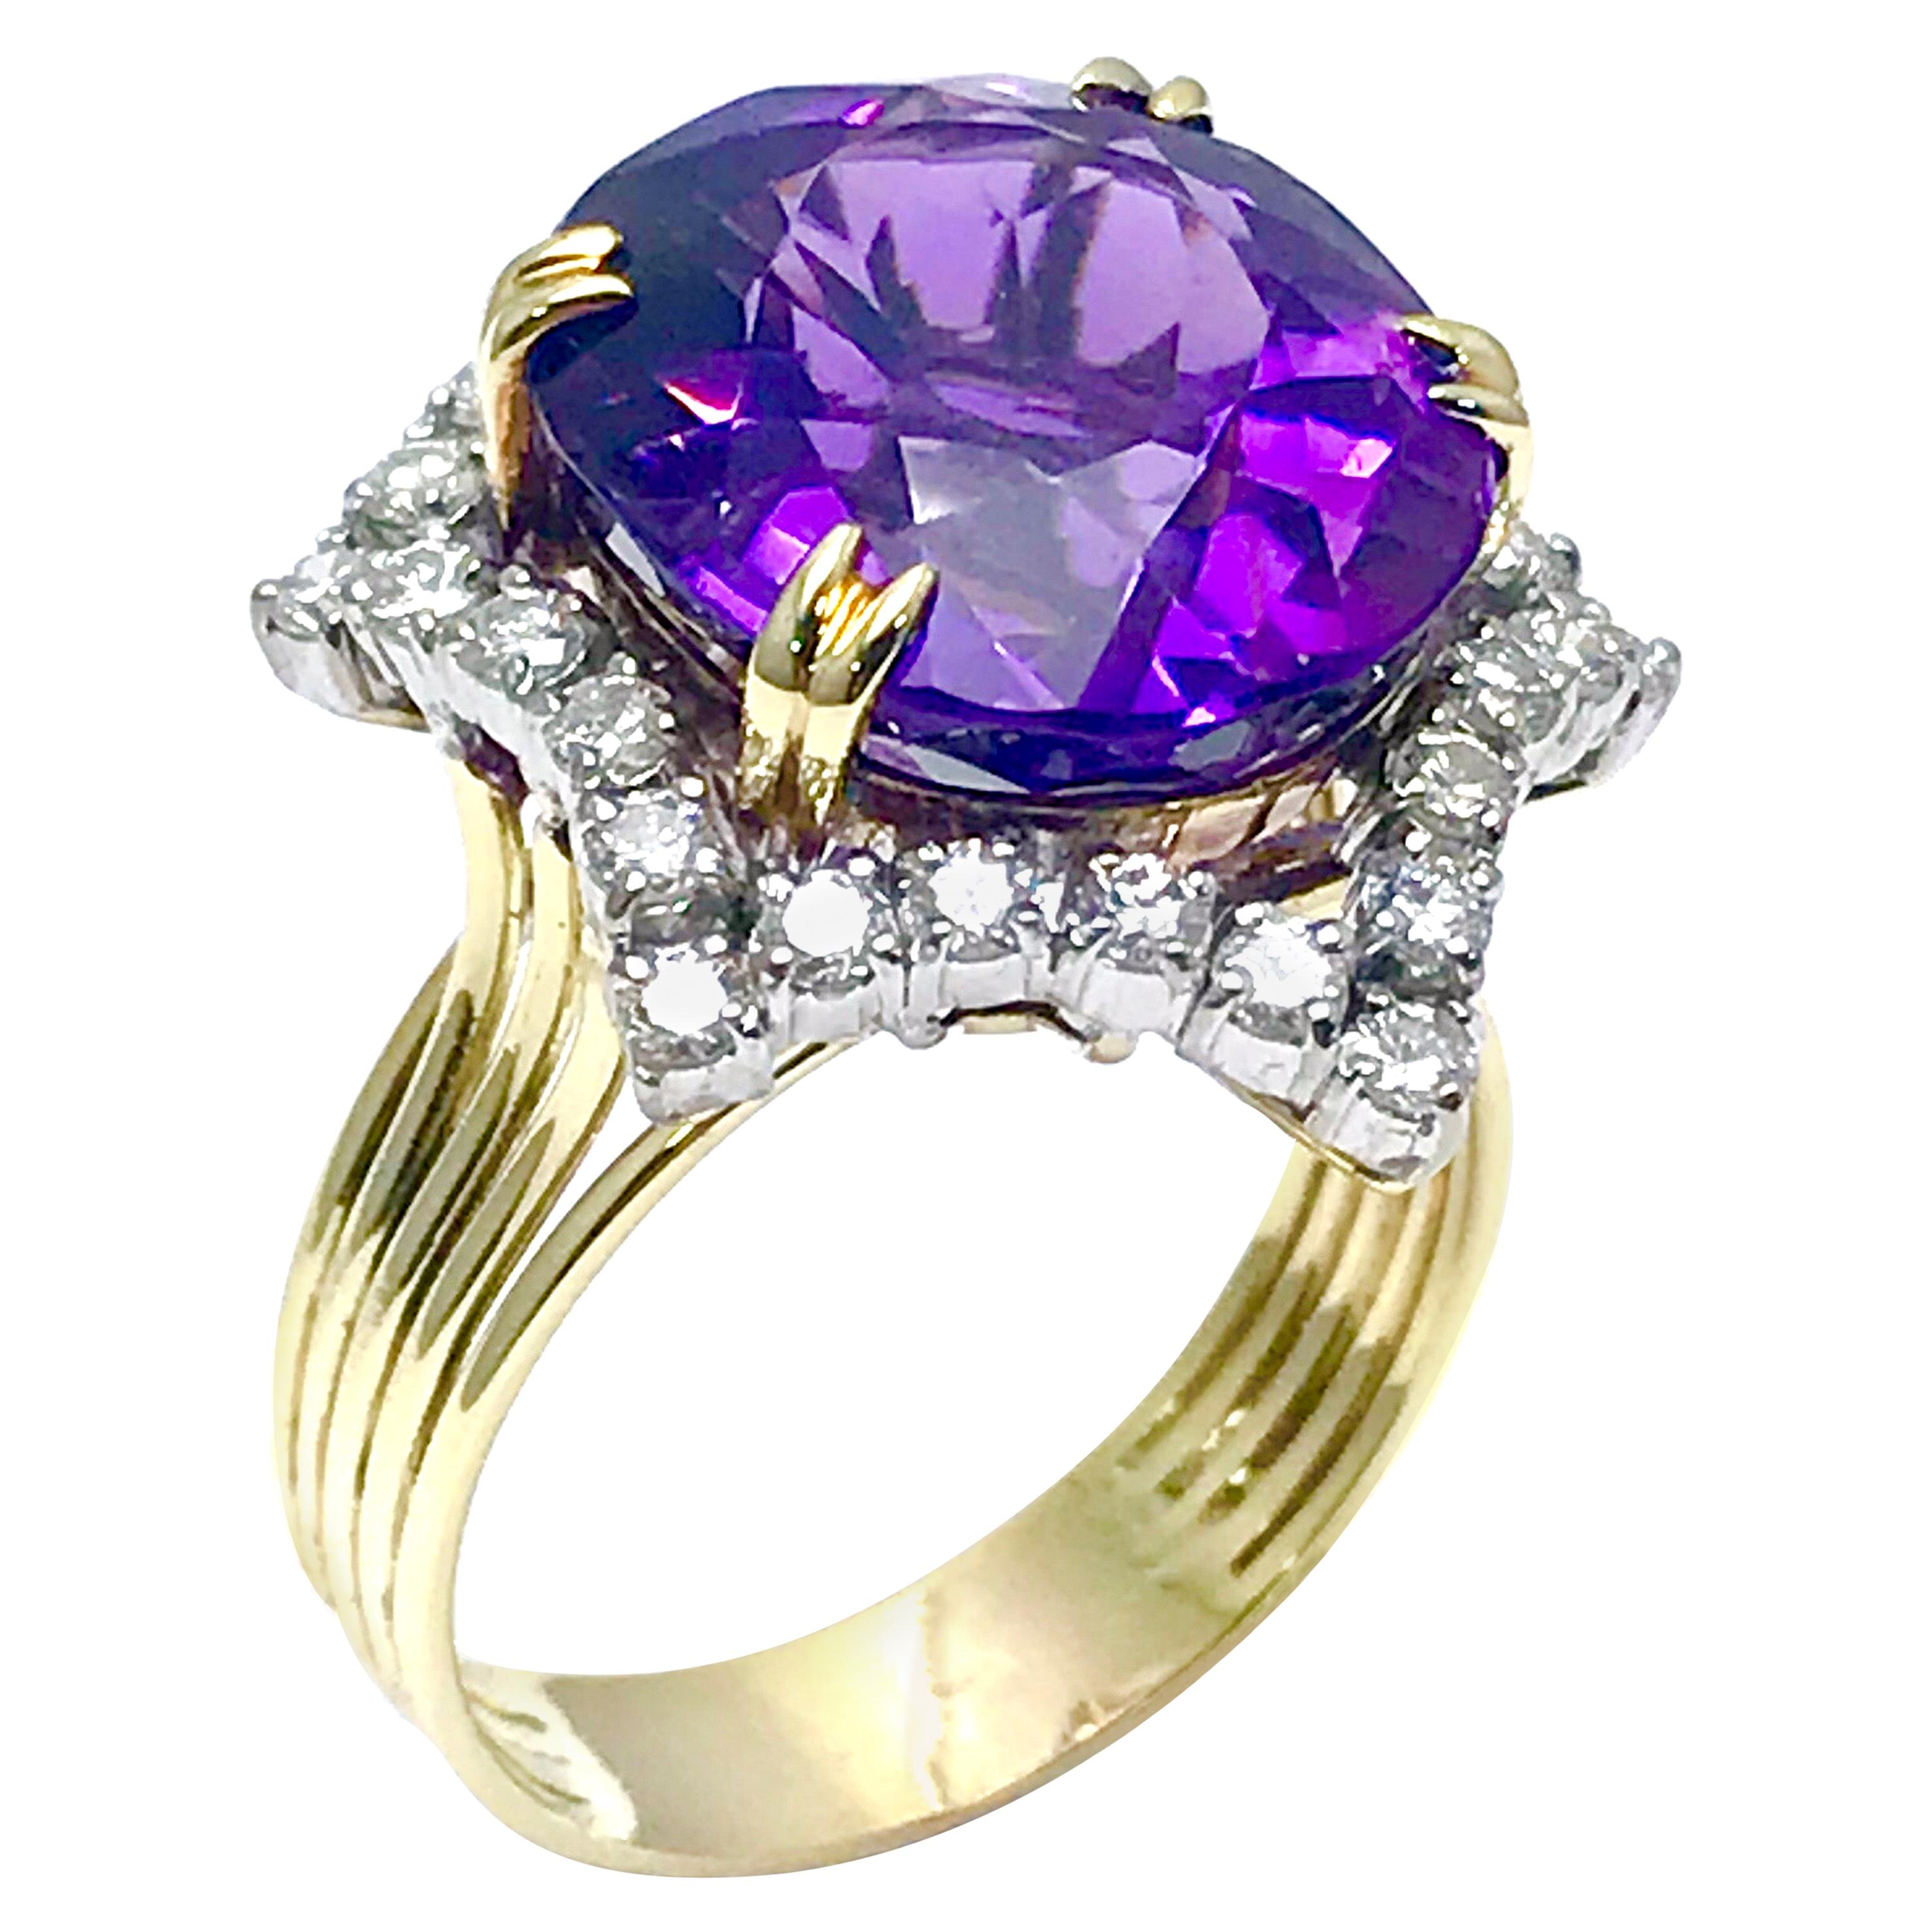 12.20 Carat Oval Amethyst and Round Diamond Cocktail Ring